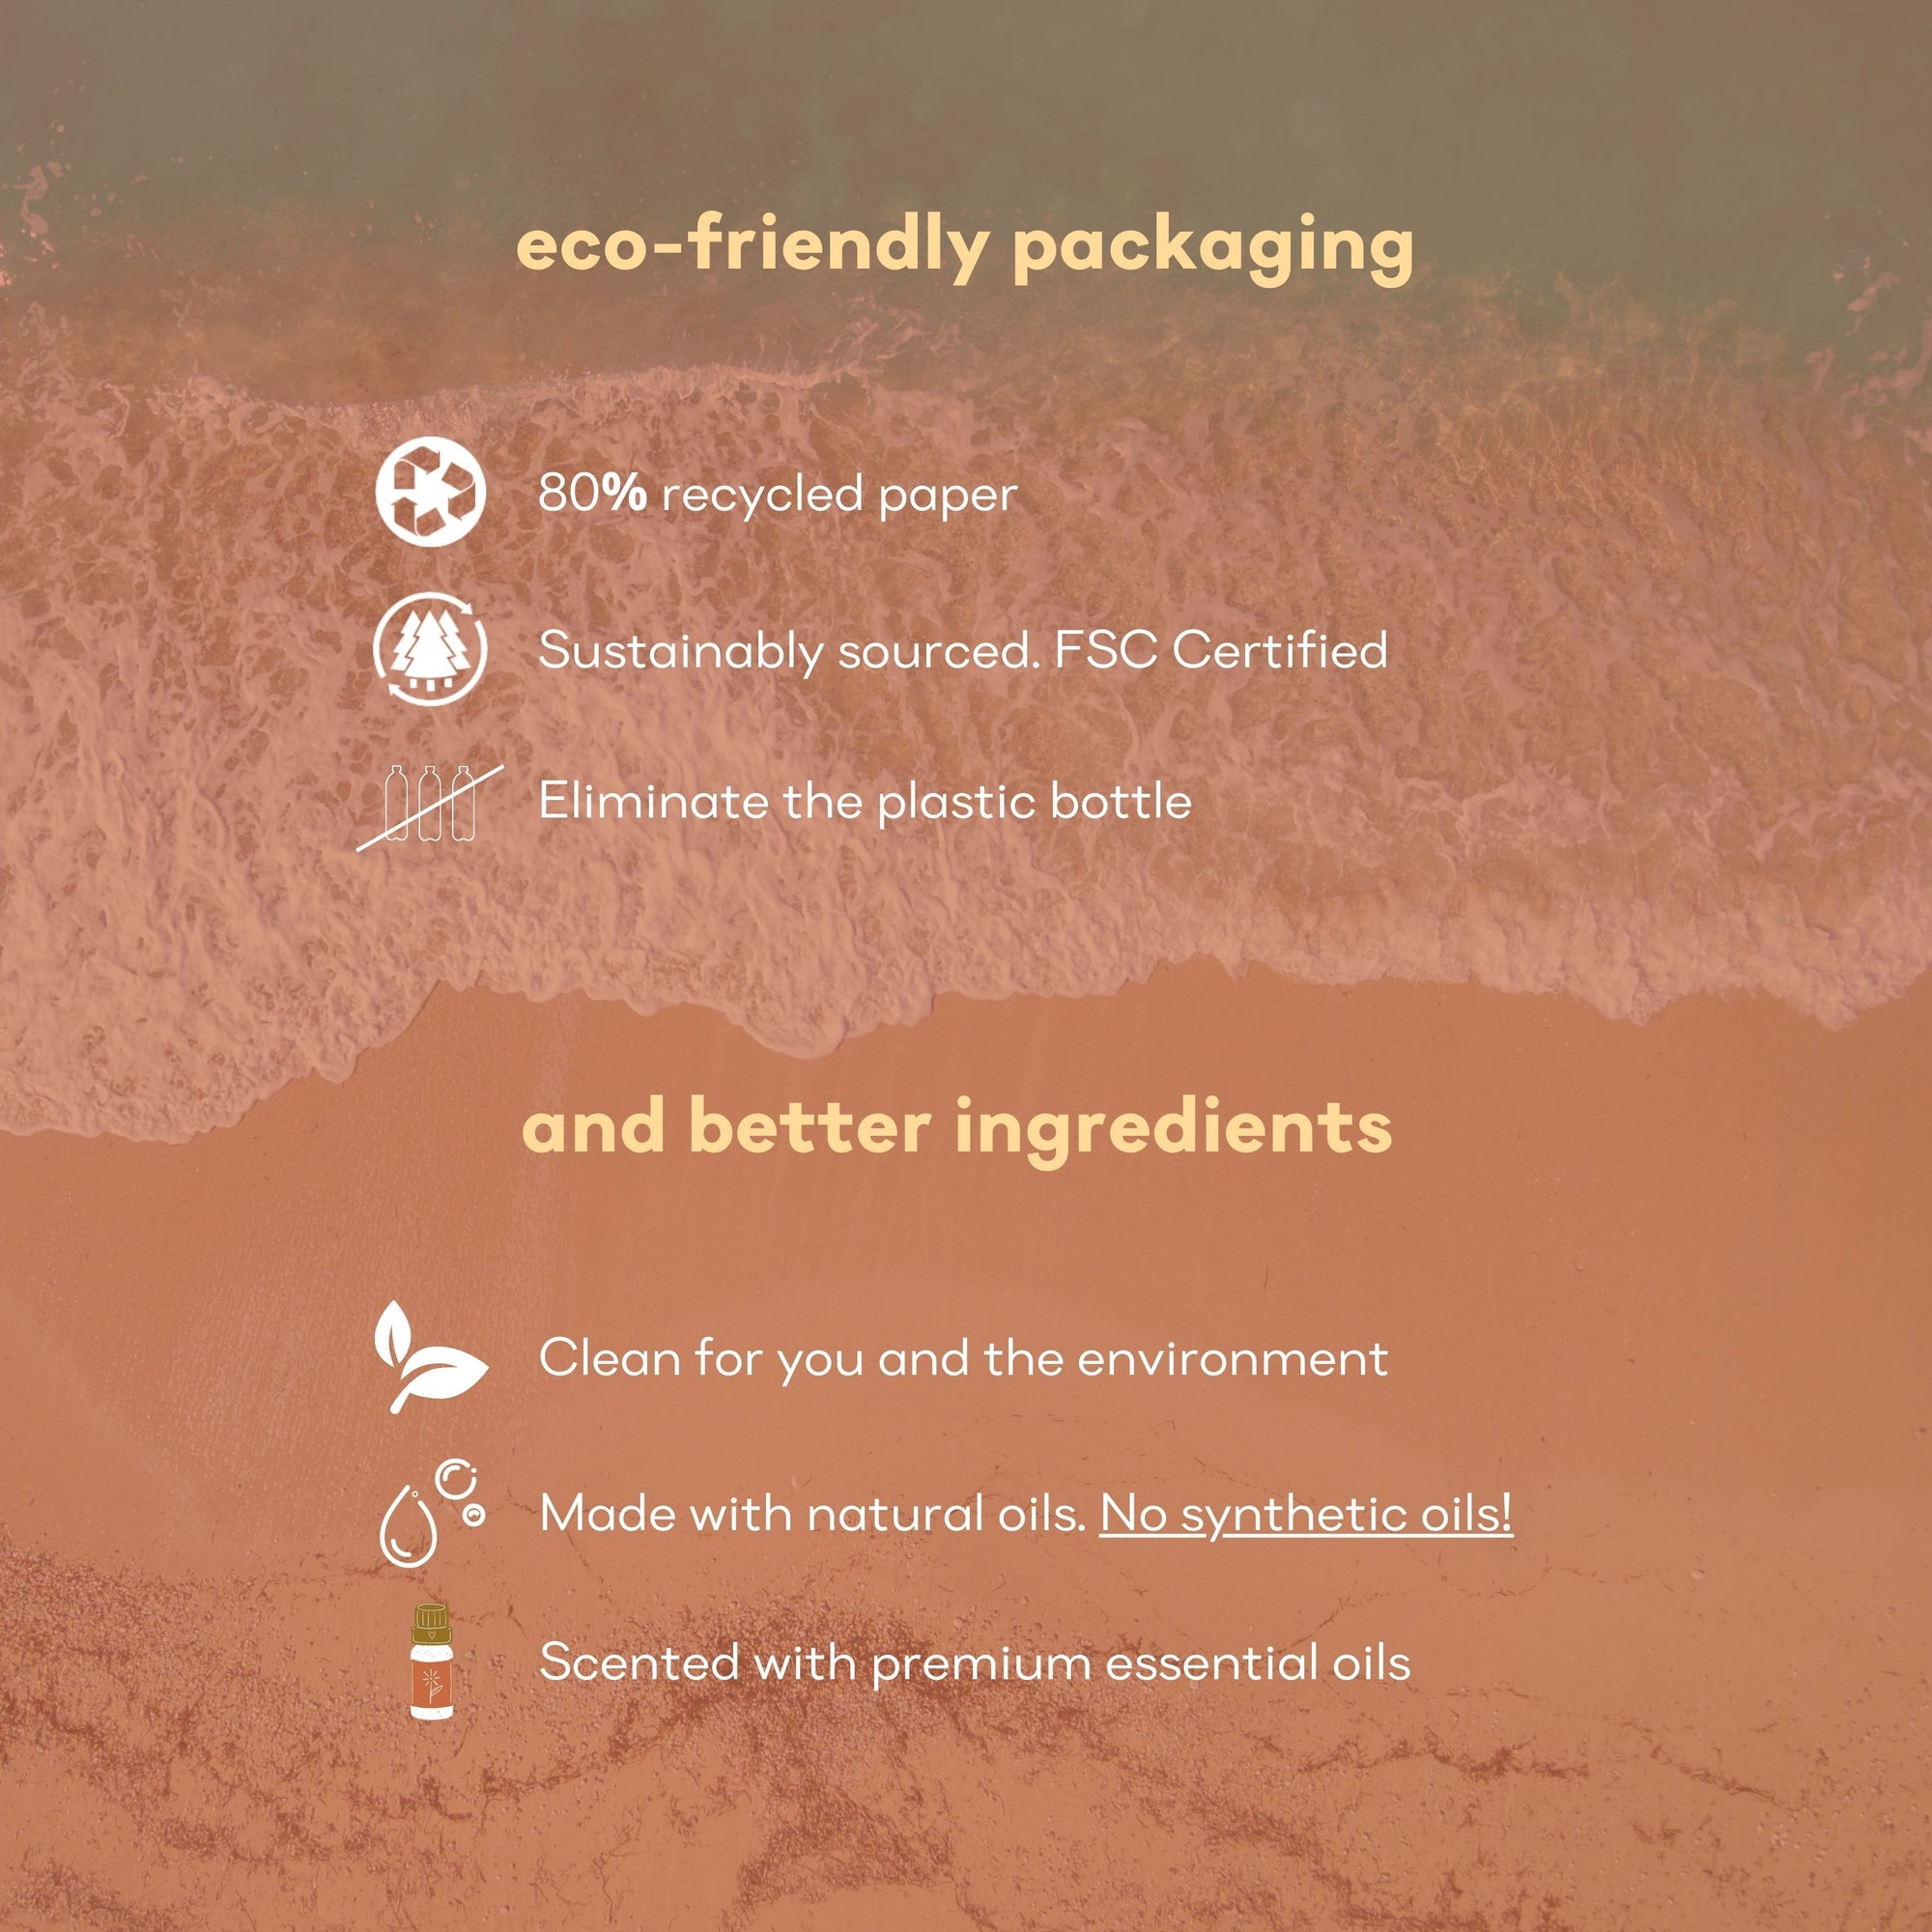 eco-friendly packaging recycled paper sustainably sourced FSC certified eliminate plastic bottle clean for you and the environment made with natural oils no synthetic oils scented with premium essential oils